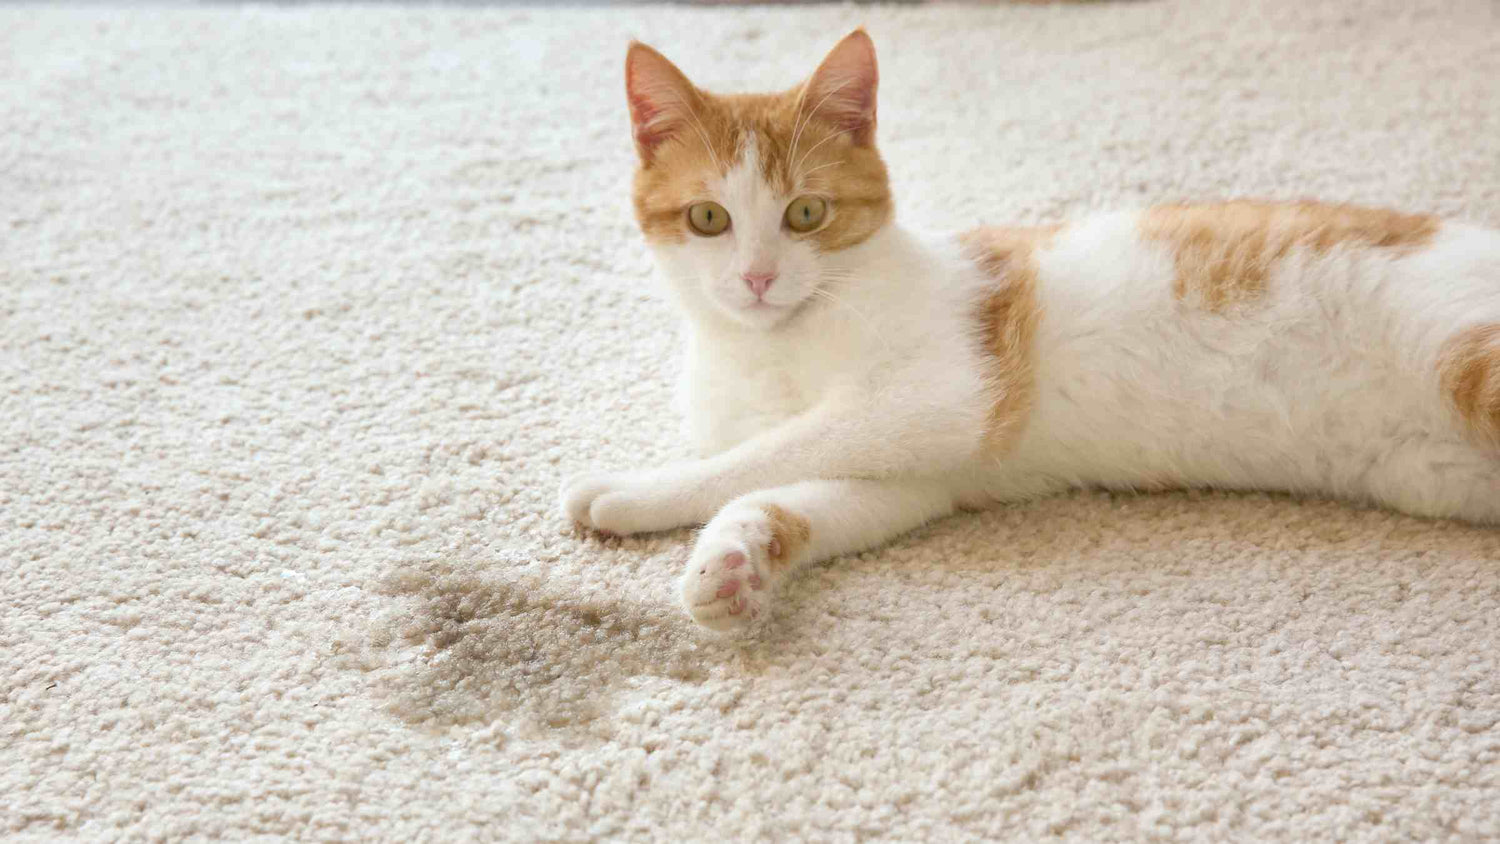 Orange and white cat laying on a carpet next to an accident or pee stain, illustrating common litter box problems